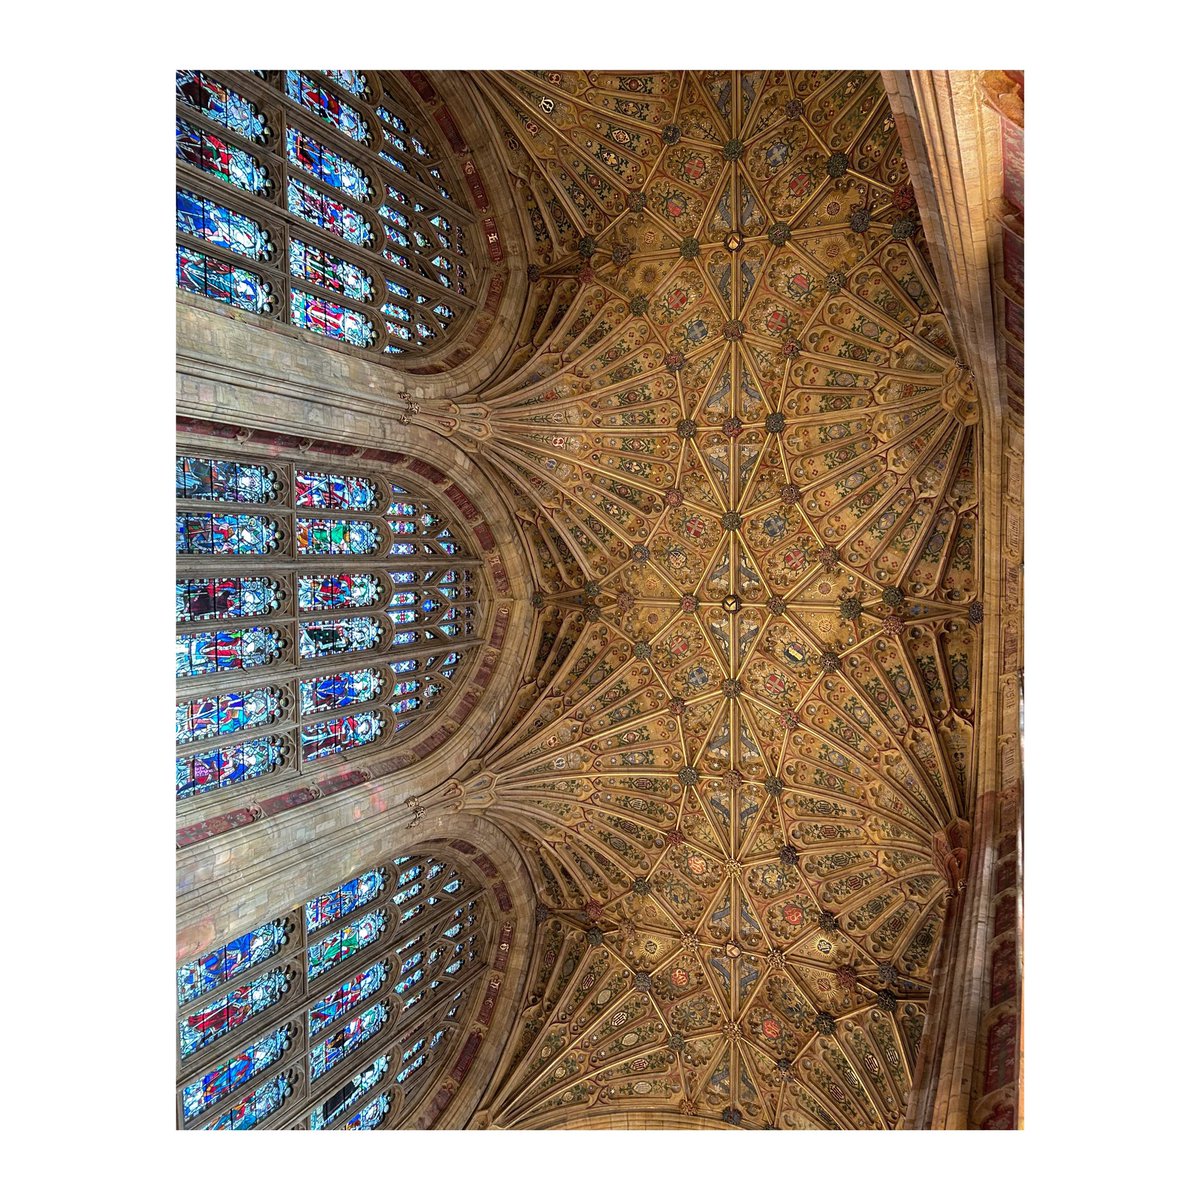 Confirmation service in Sherborne Abbey this morning. Exquisite fan vaulting cascades above you at every turn - was hard to keep my eyes on the words.